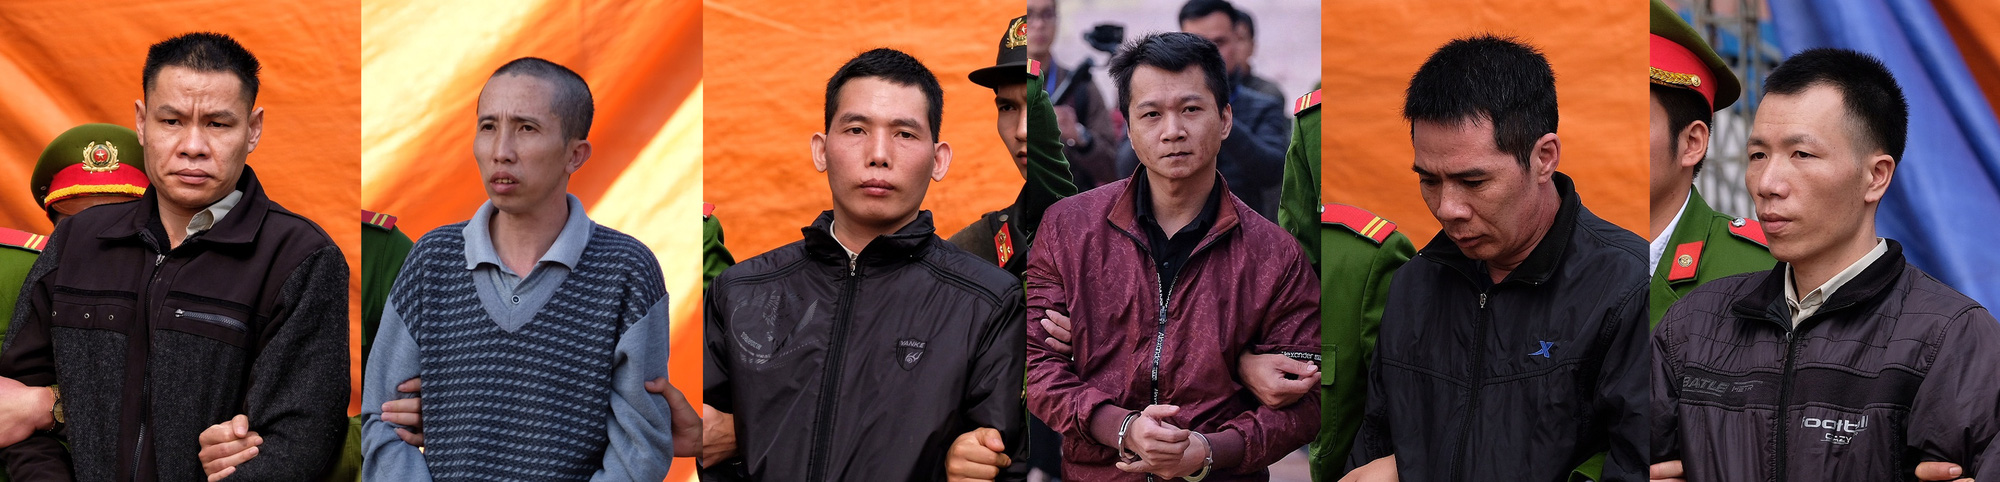 6 men sentenced to death for kidnapping, gang raping, murdering Vietnamese college student